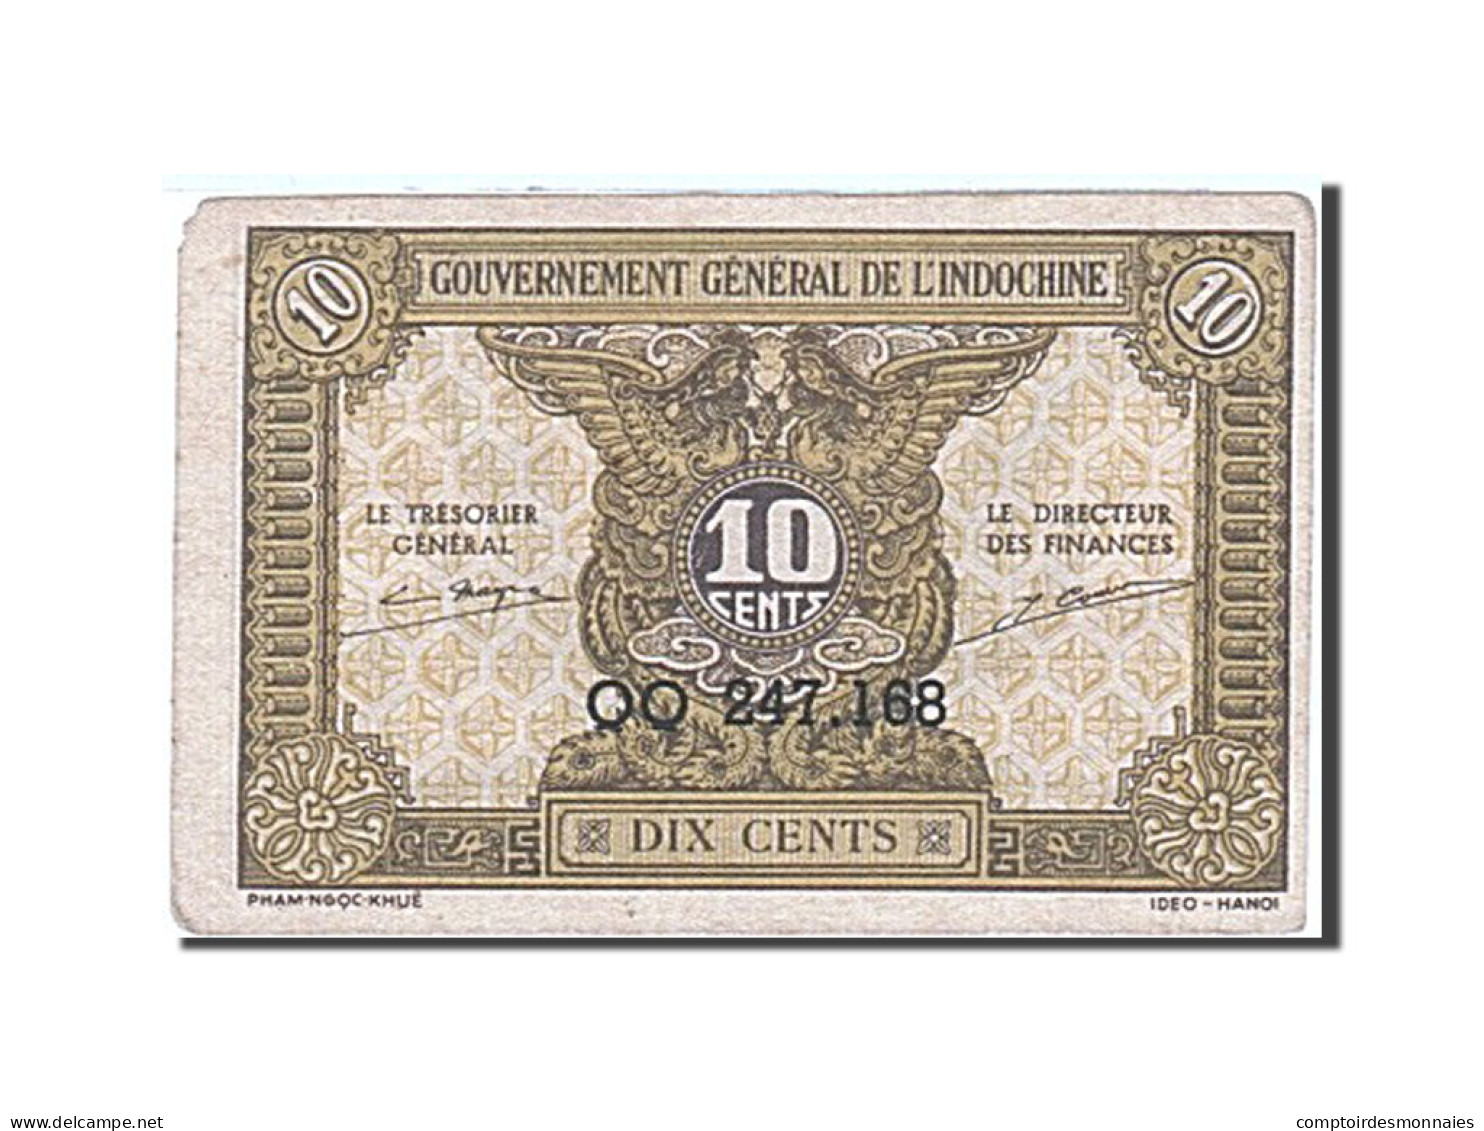 Billet, FRENCH INDO-CHINA, 10 Cents, 1942, Undated (1942), KM:89a, SUP - Indochine